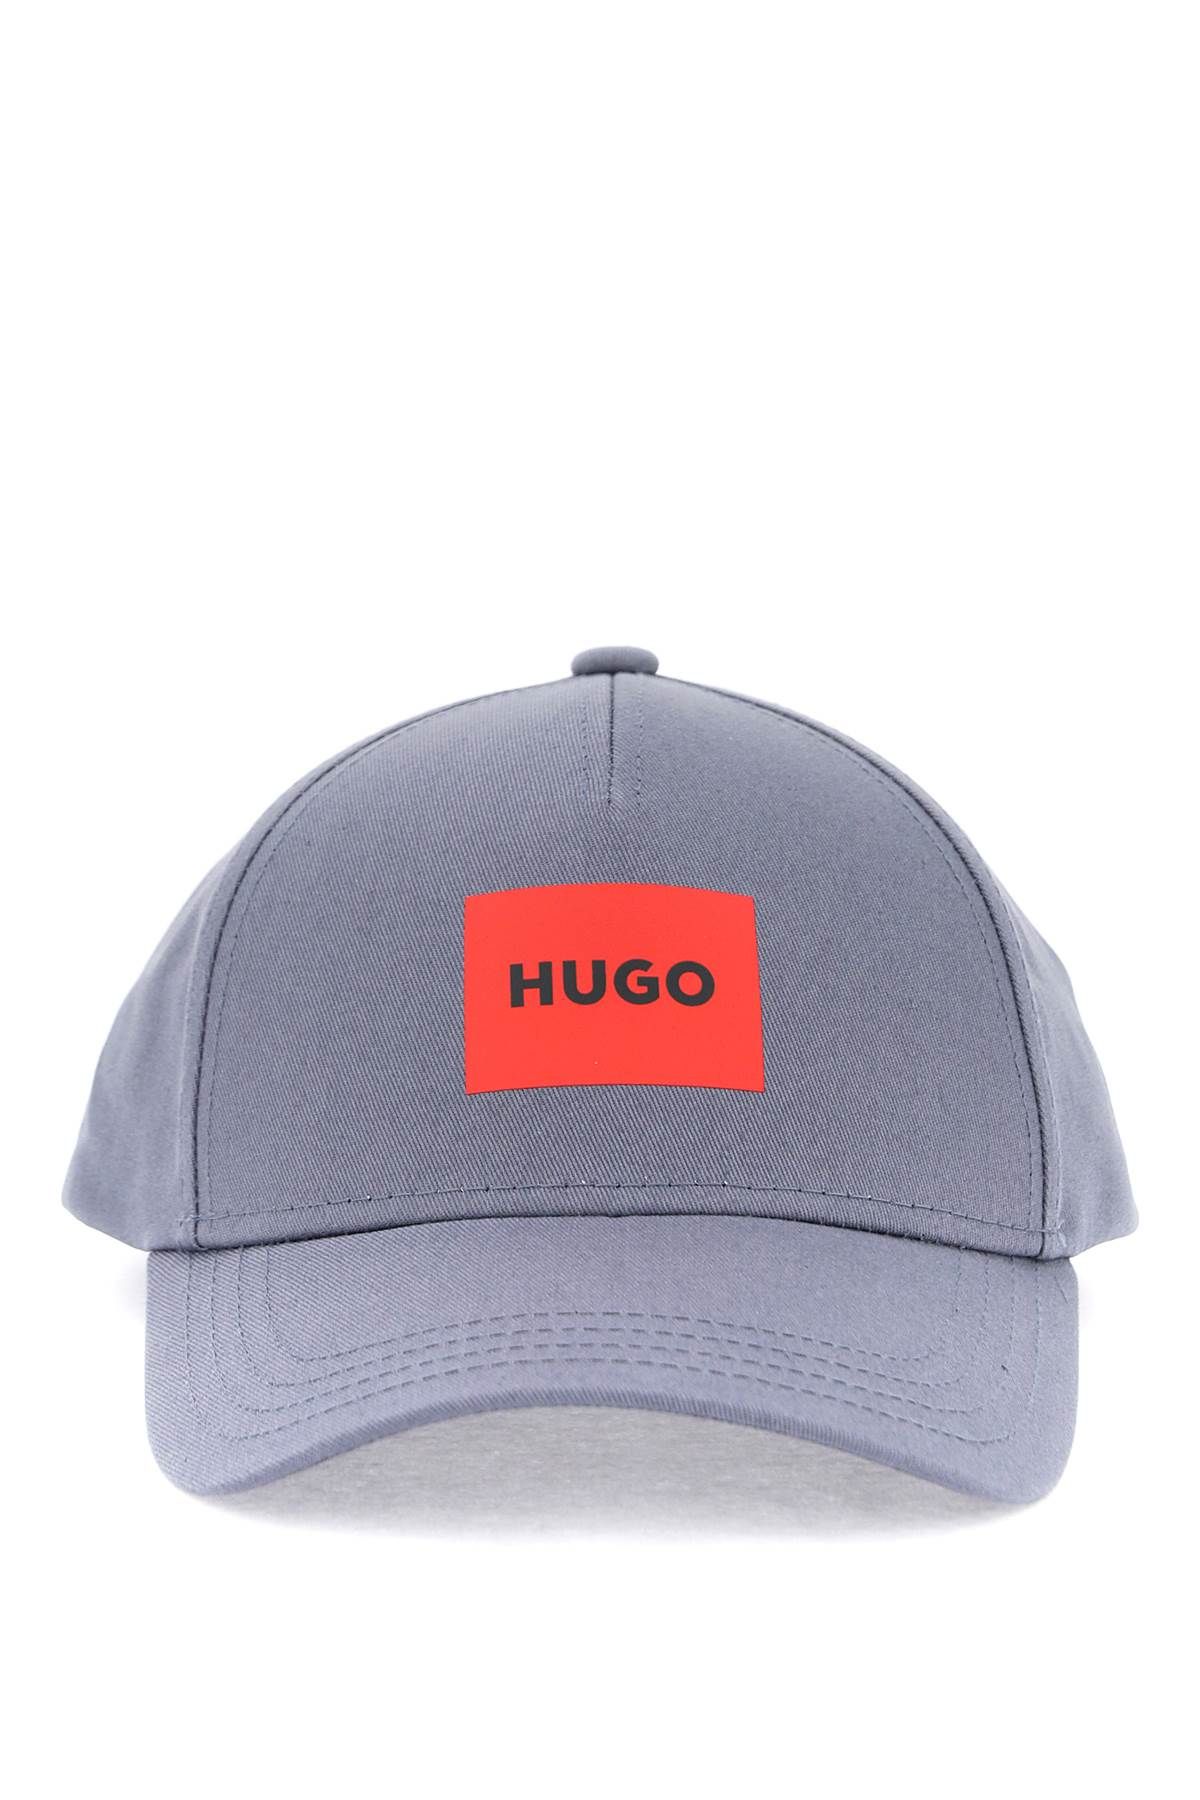 Shop Hugo Baseball Cap With Patch Design In Grey,blue